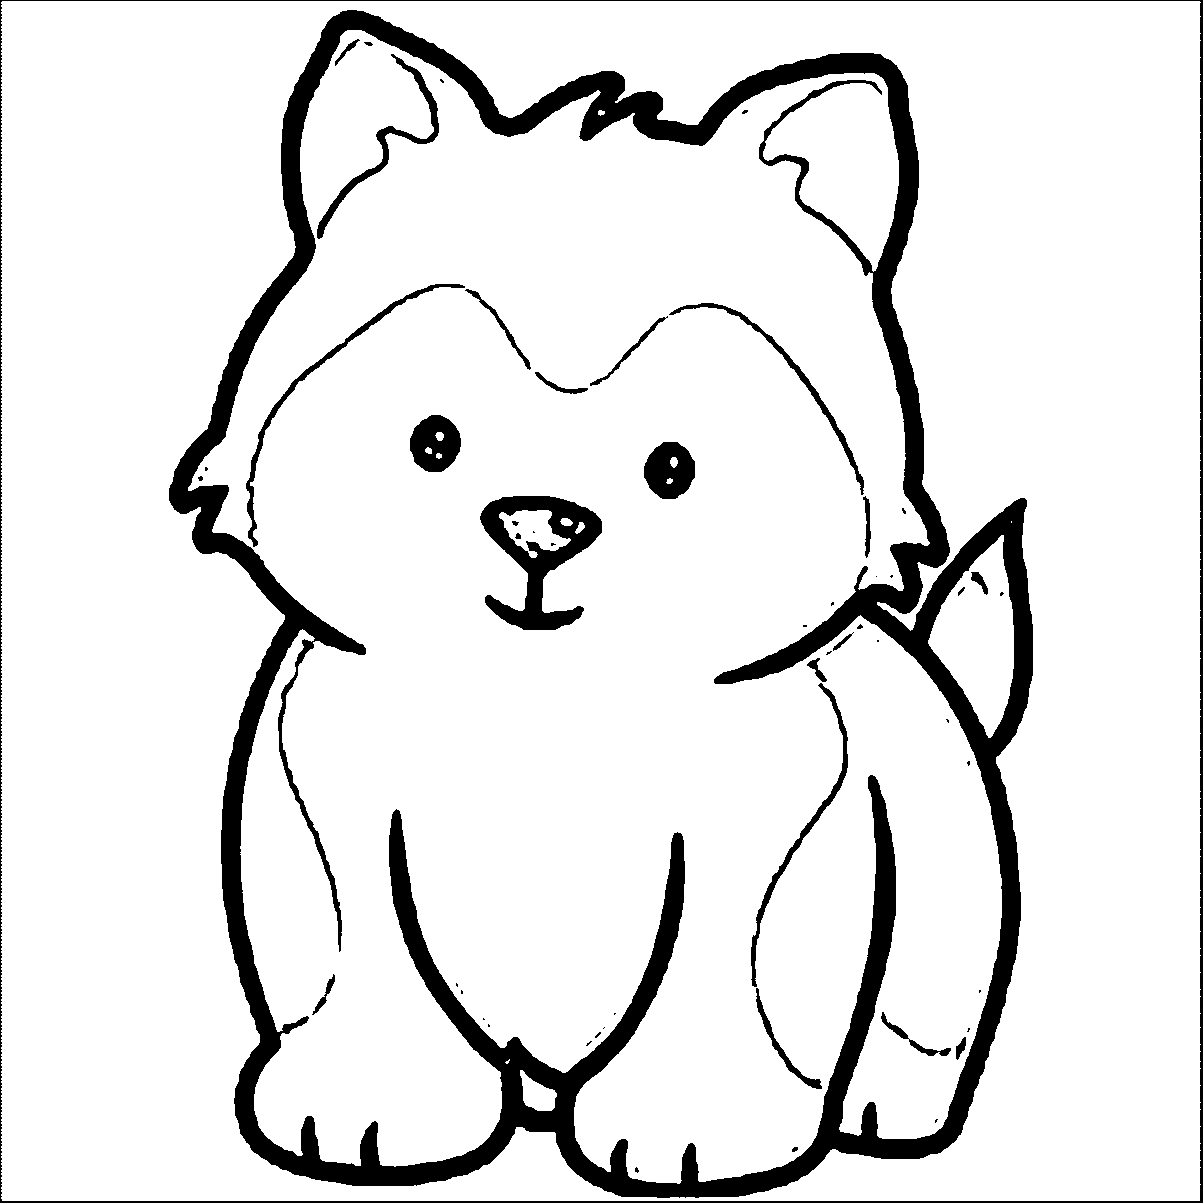 husky colouring pages husky coloring pages best coloring pages for kids colouring husky pages 